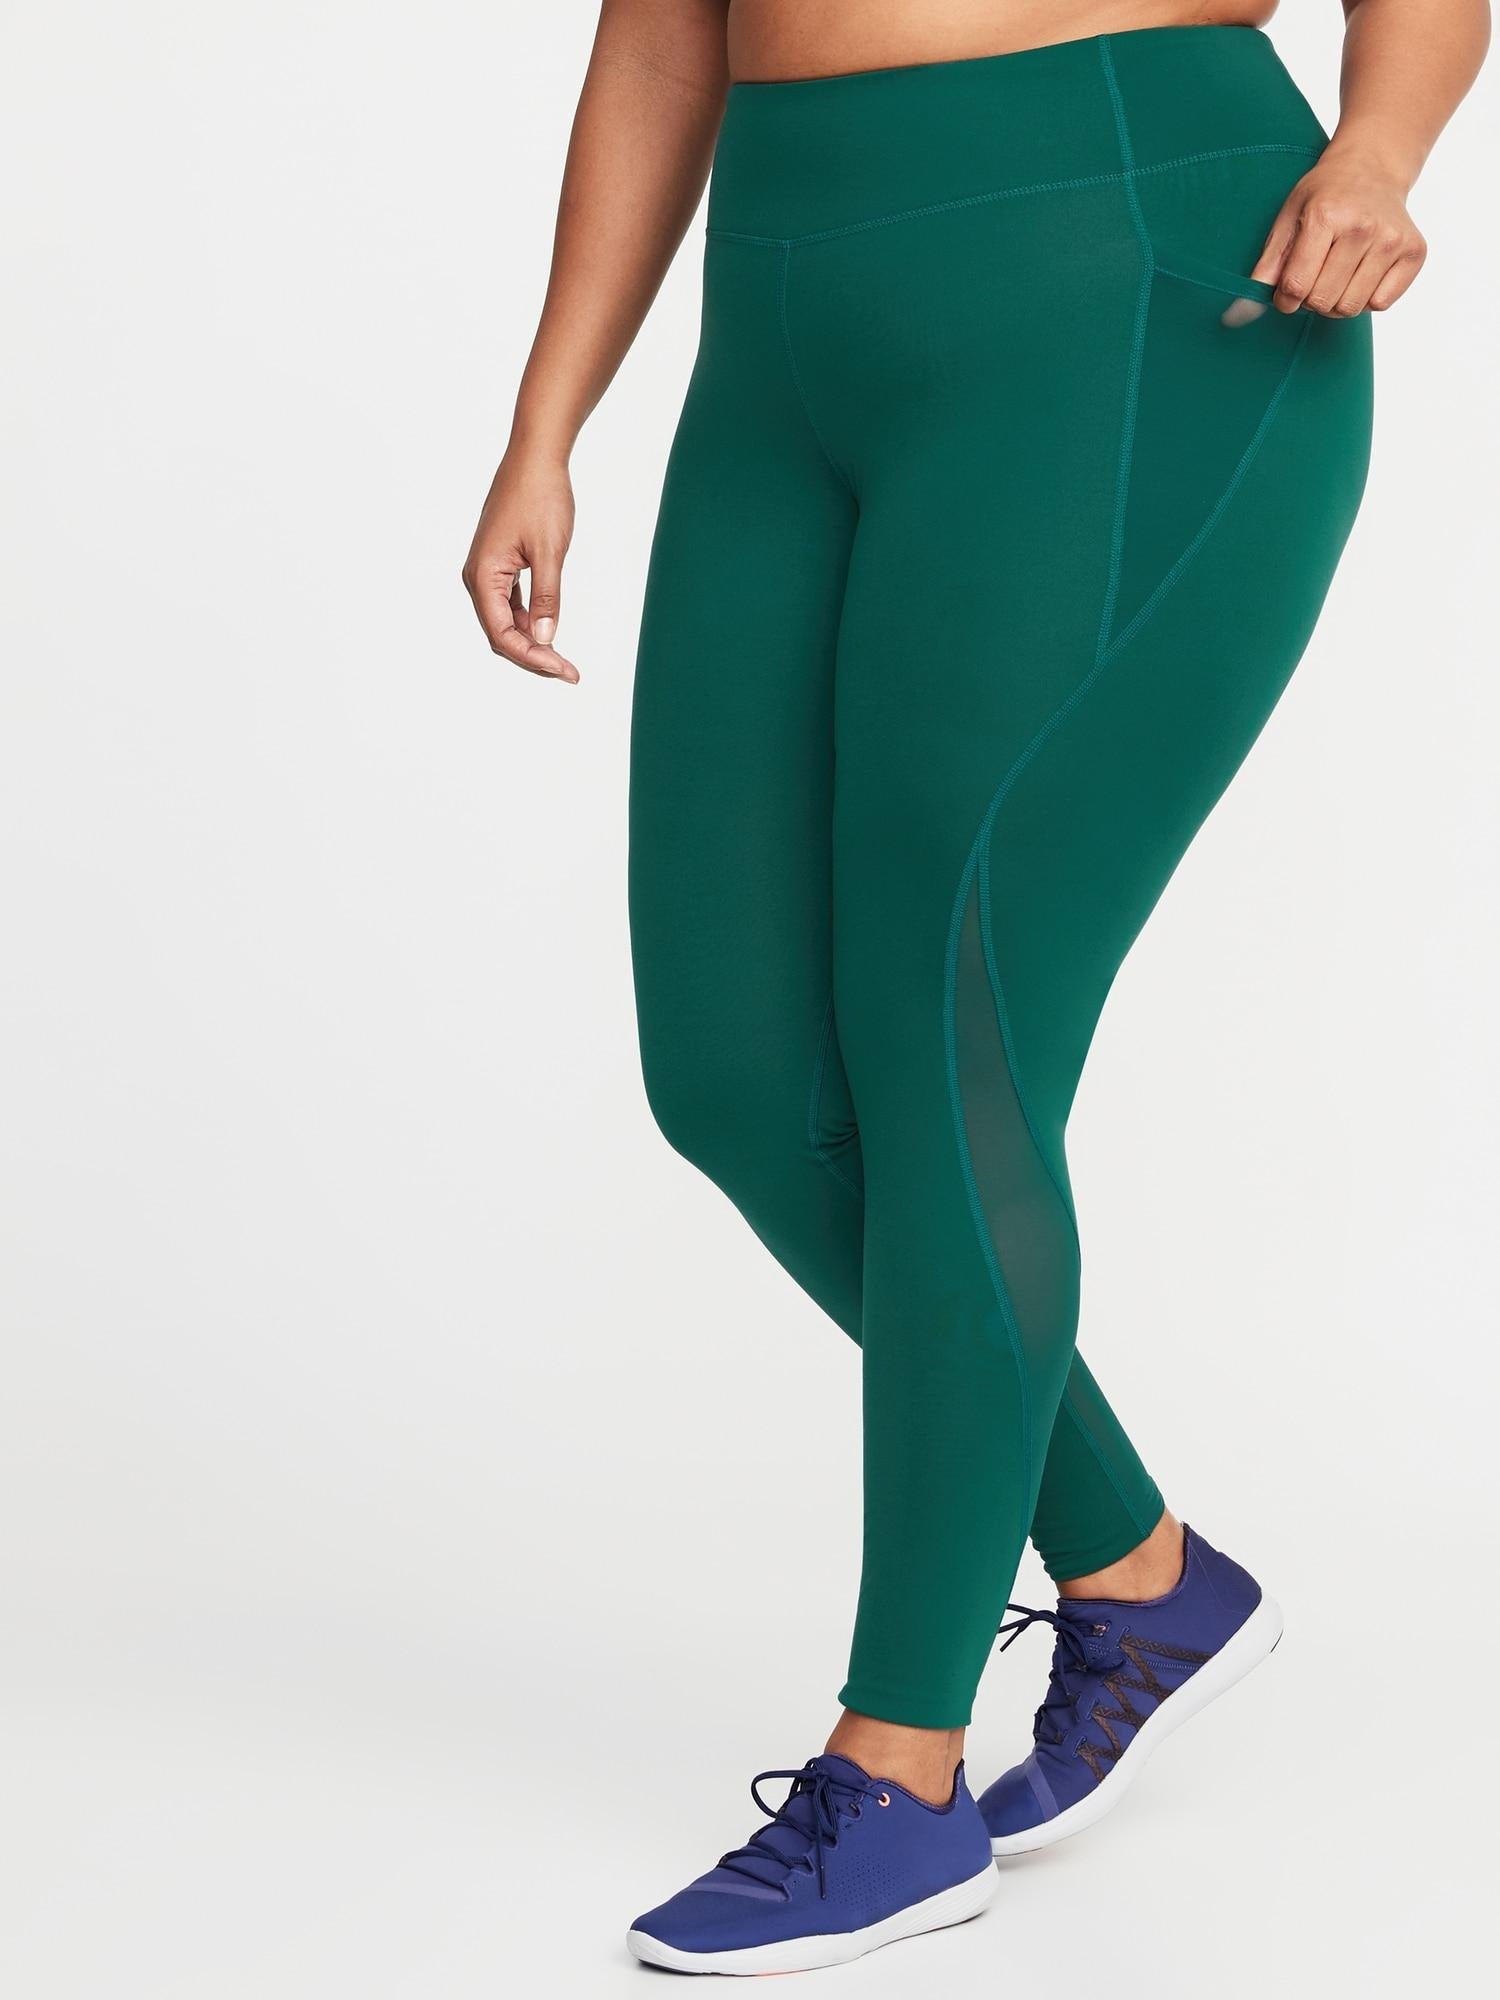 Plus Size Compression Leggings For Traveling